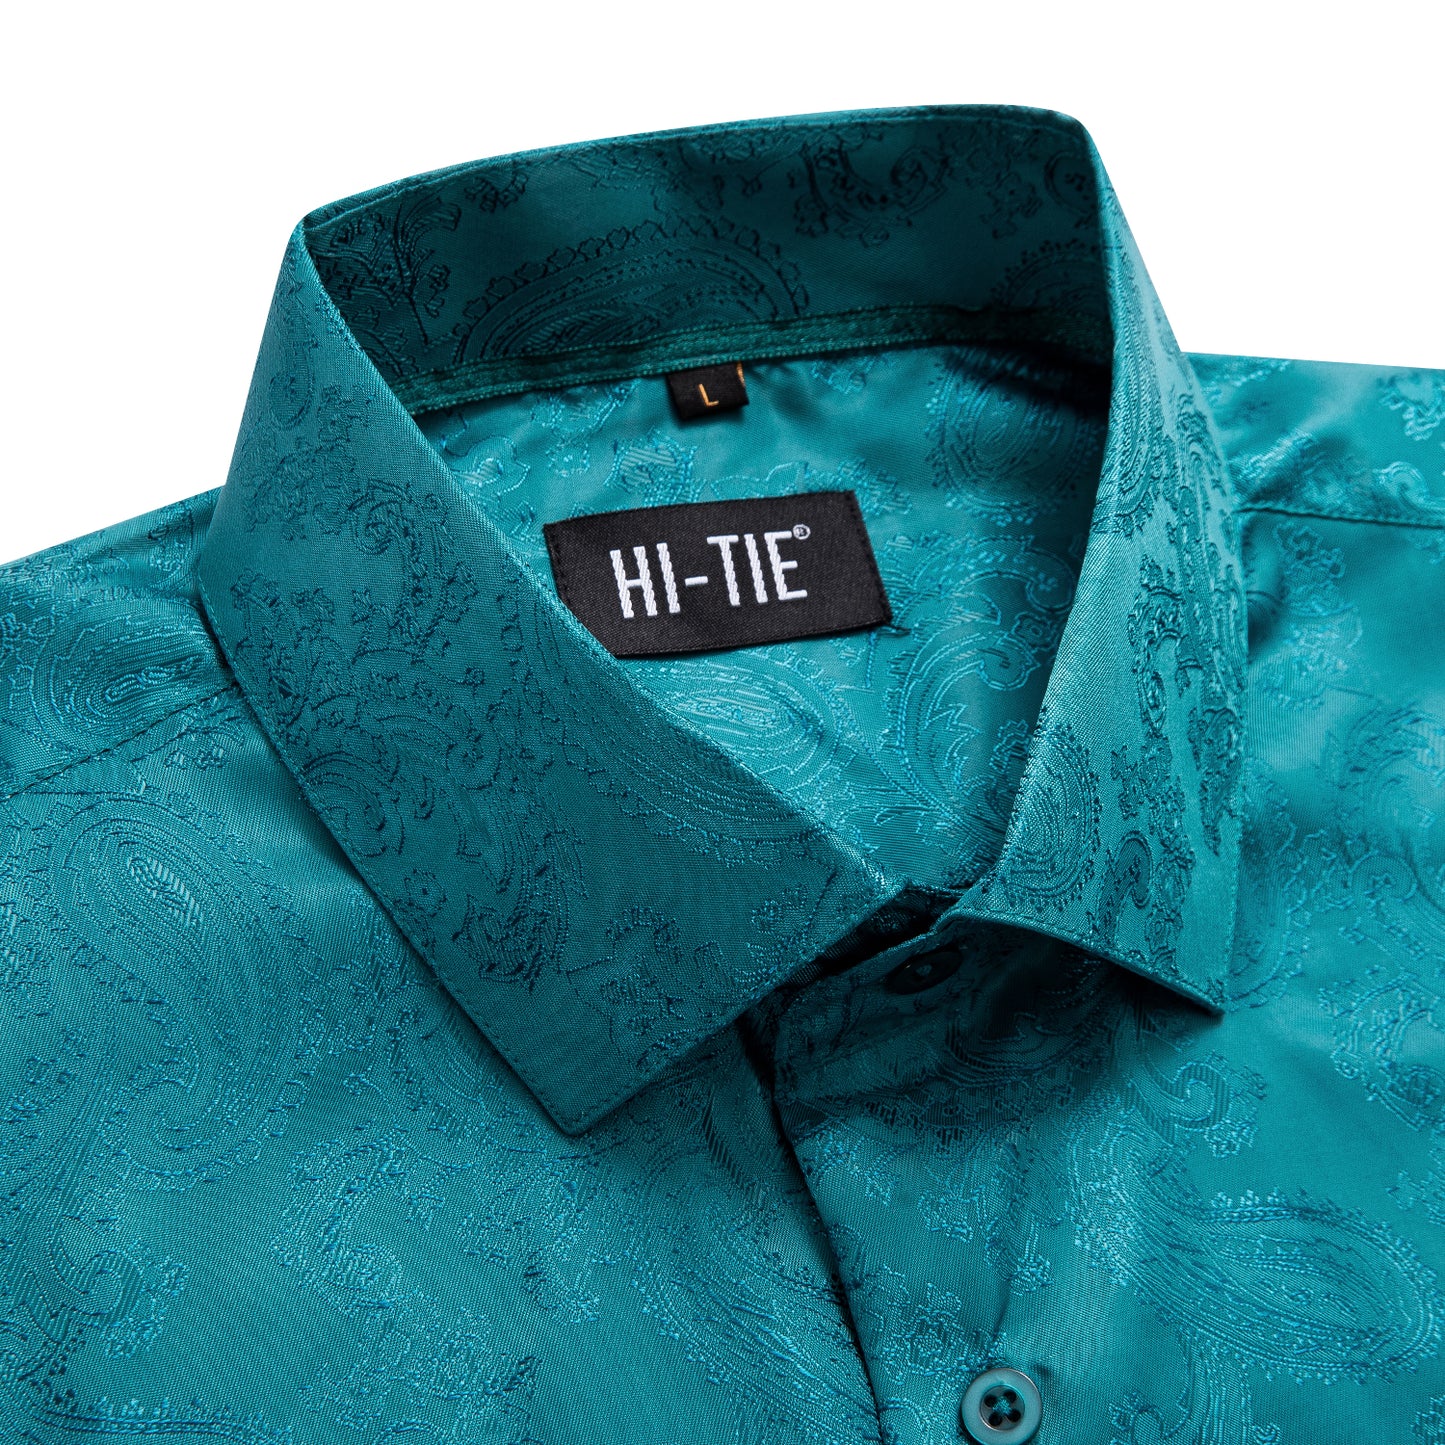 Novelty Silky Shirt - Teal Nuts